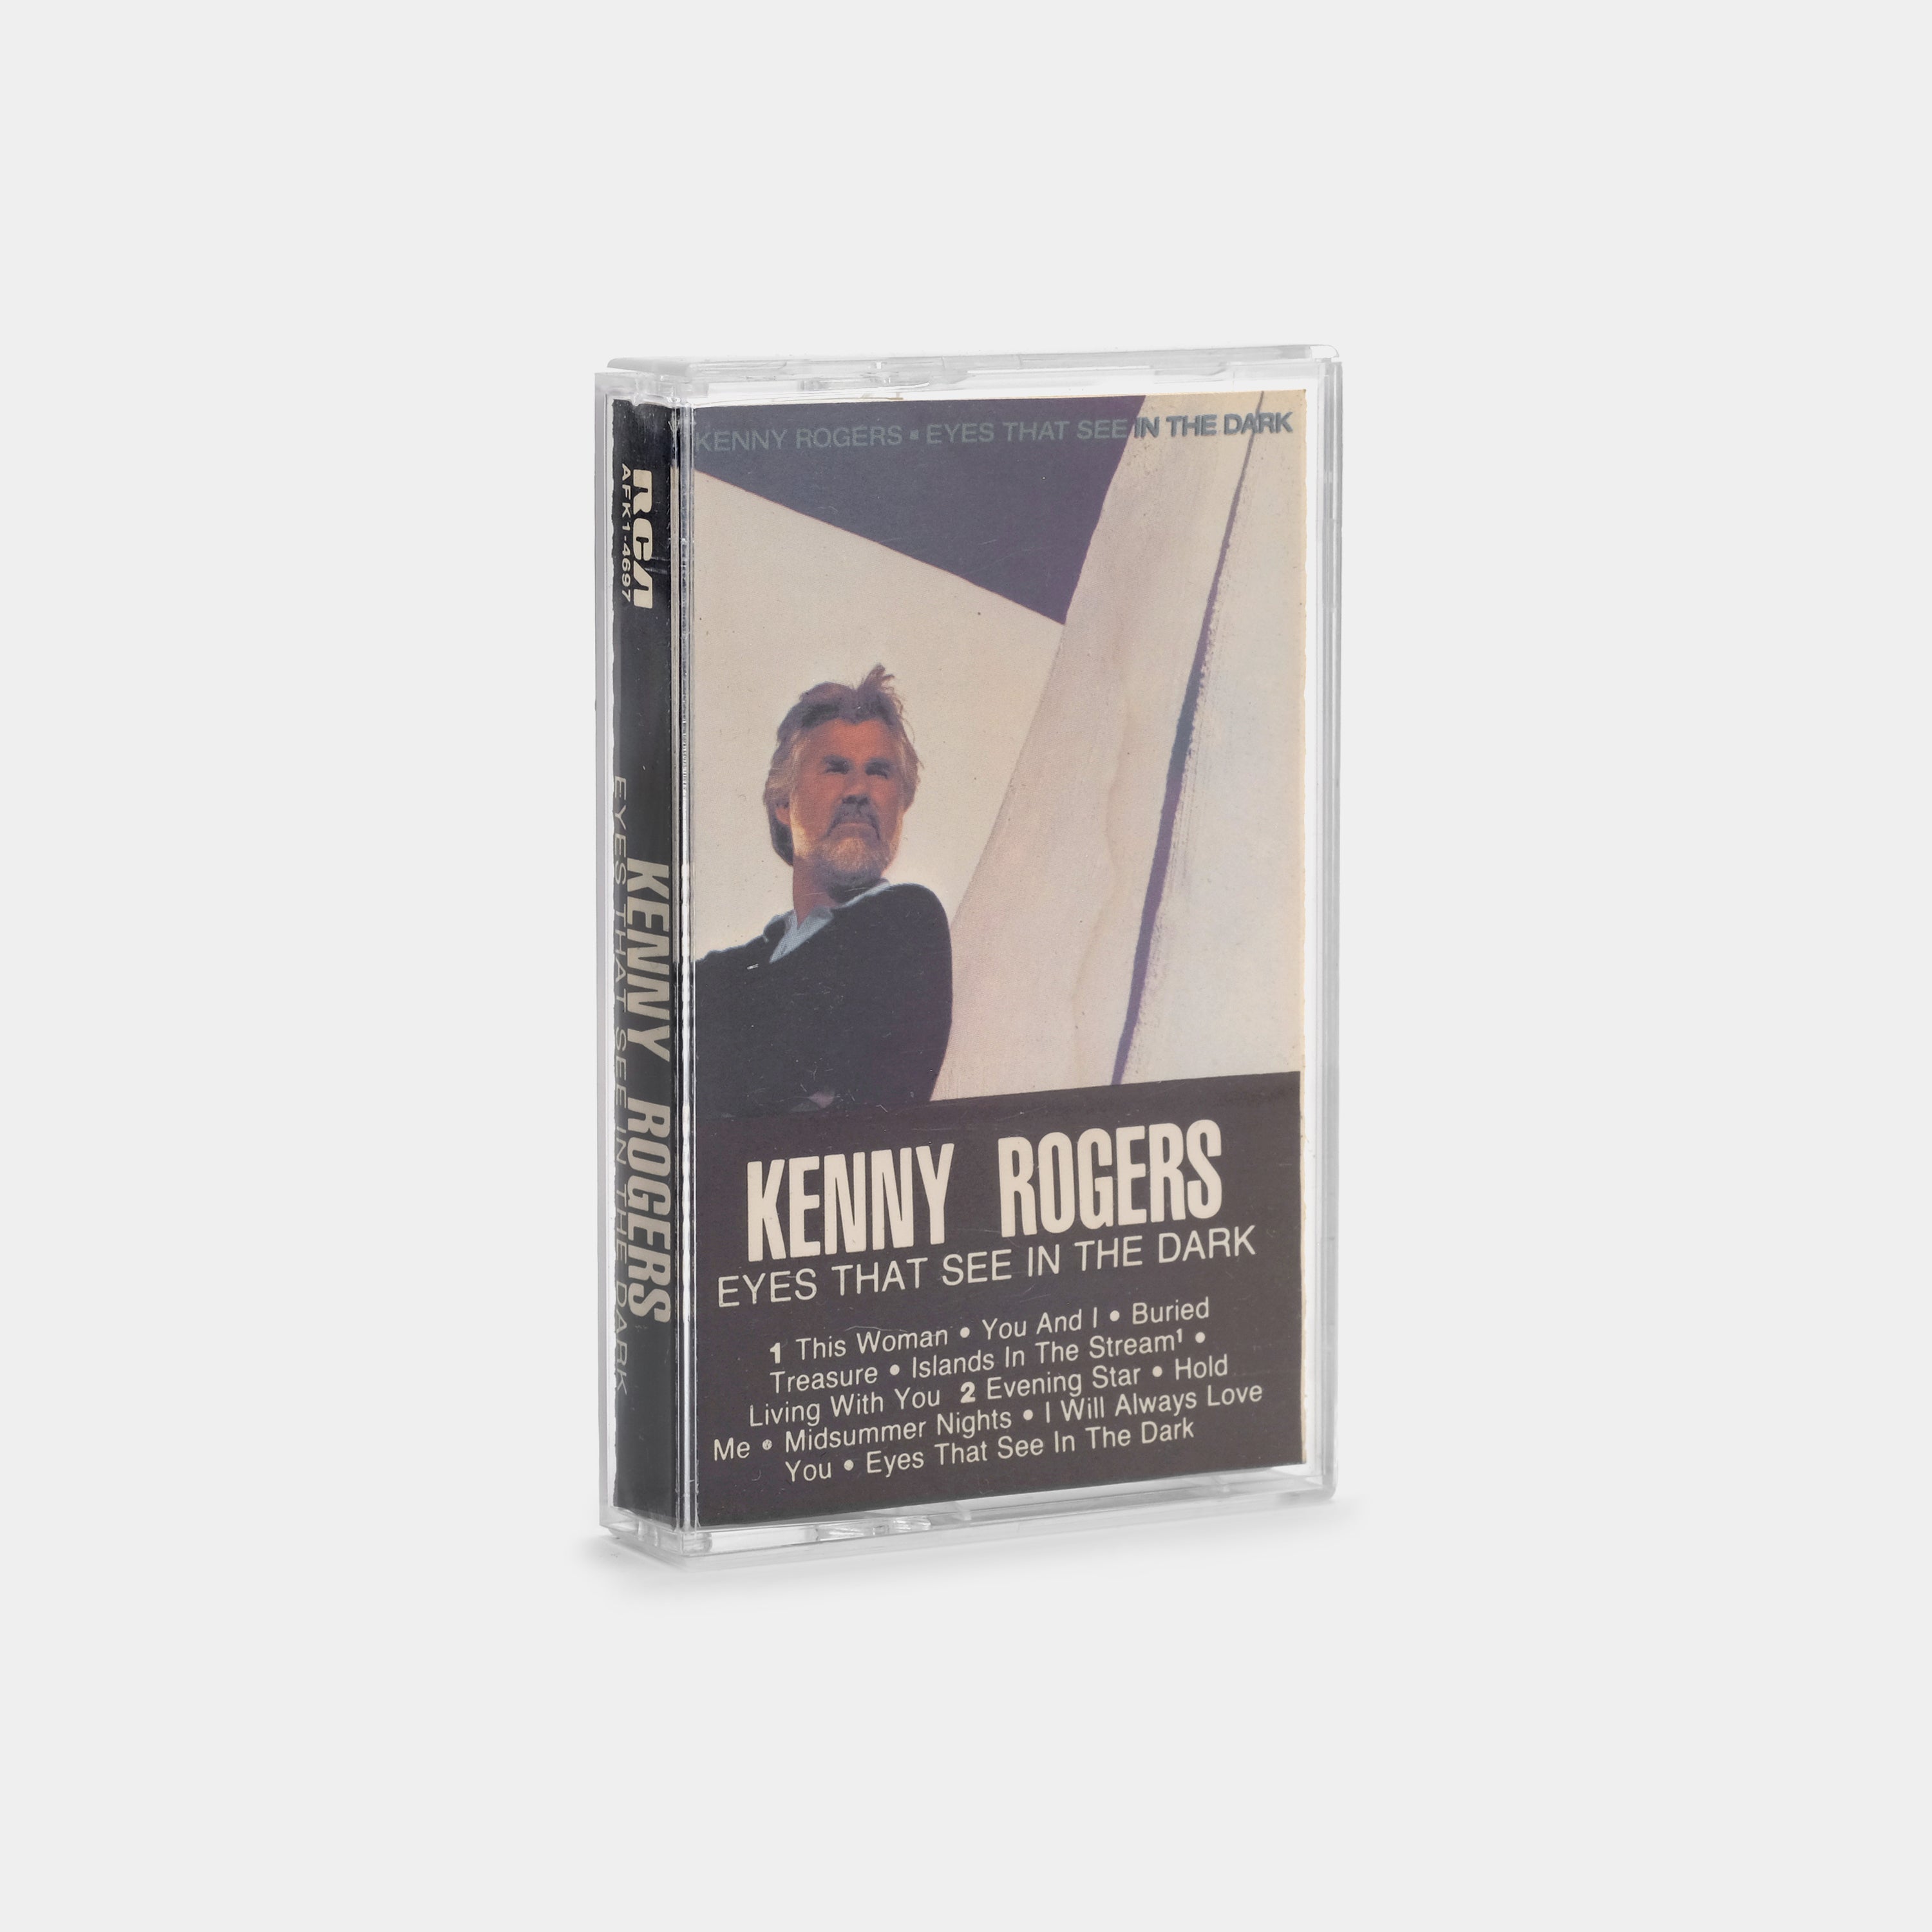 Kenny Rogers - Eyes That See In The Dark Cassette Tape